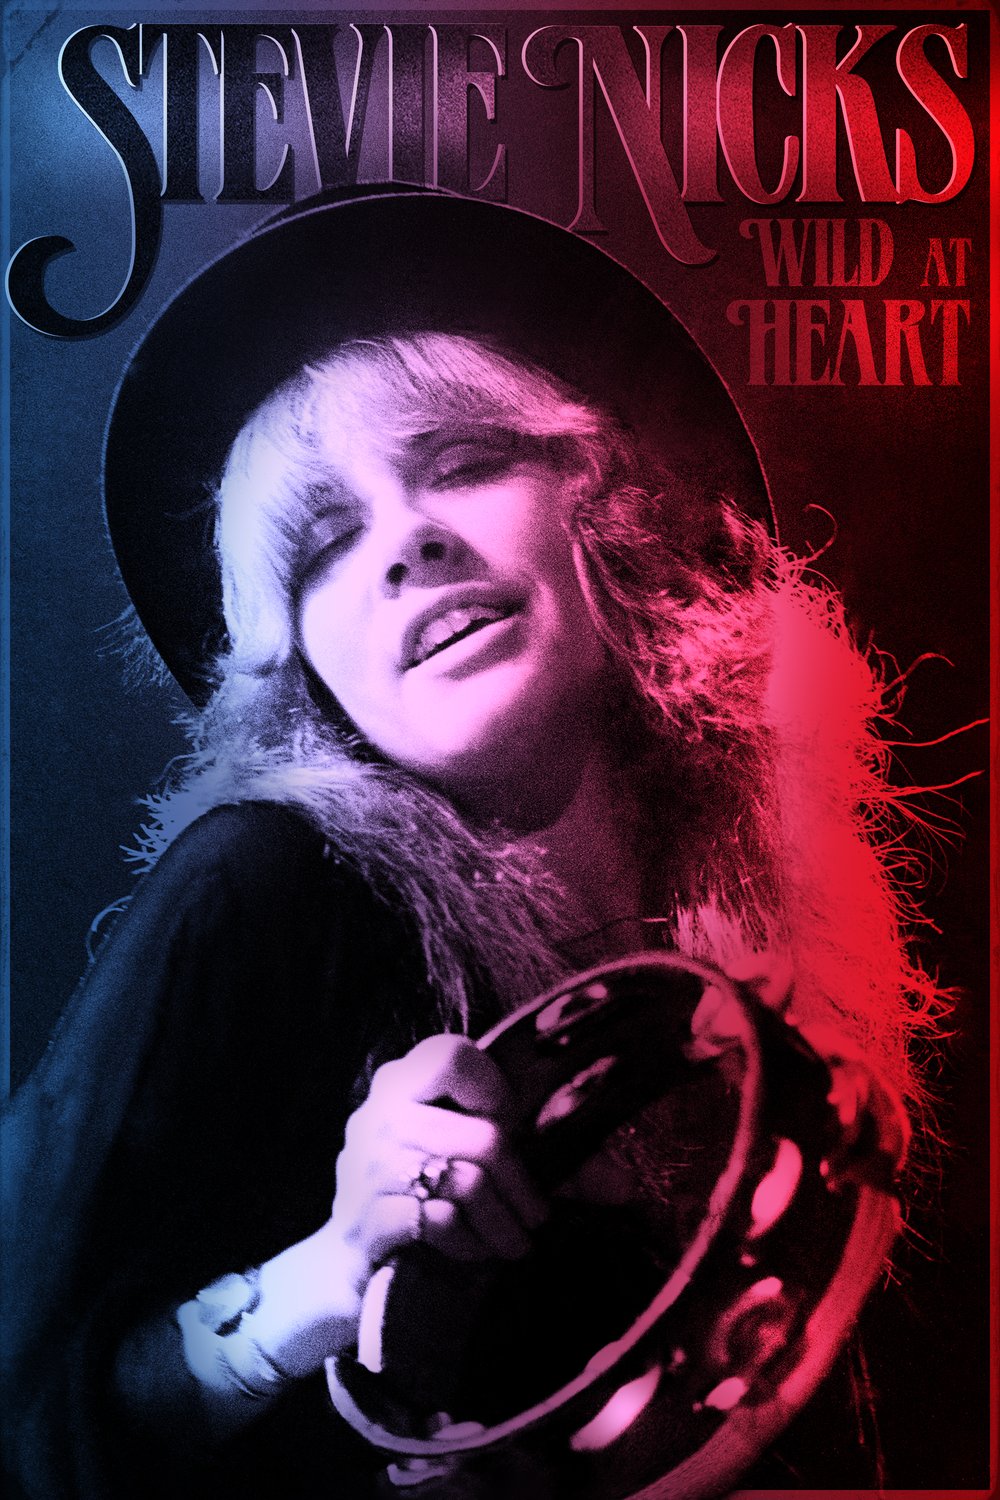 Poster of the movie Stevie Nicks: Wild at Heart